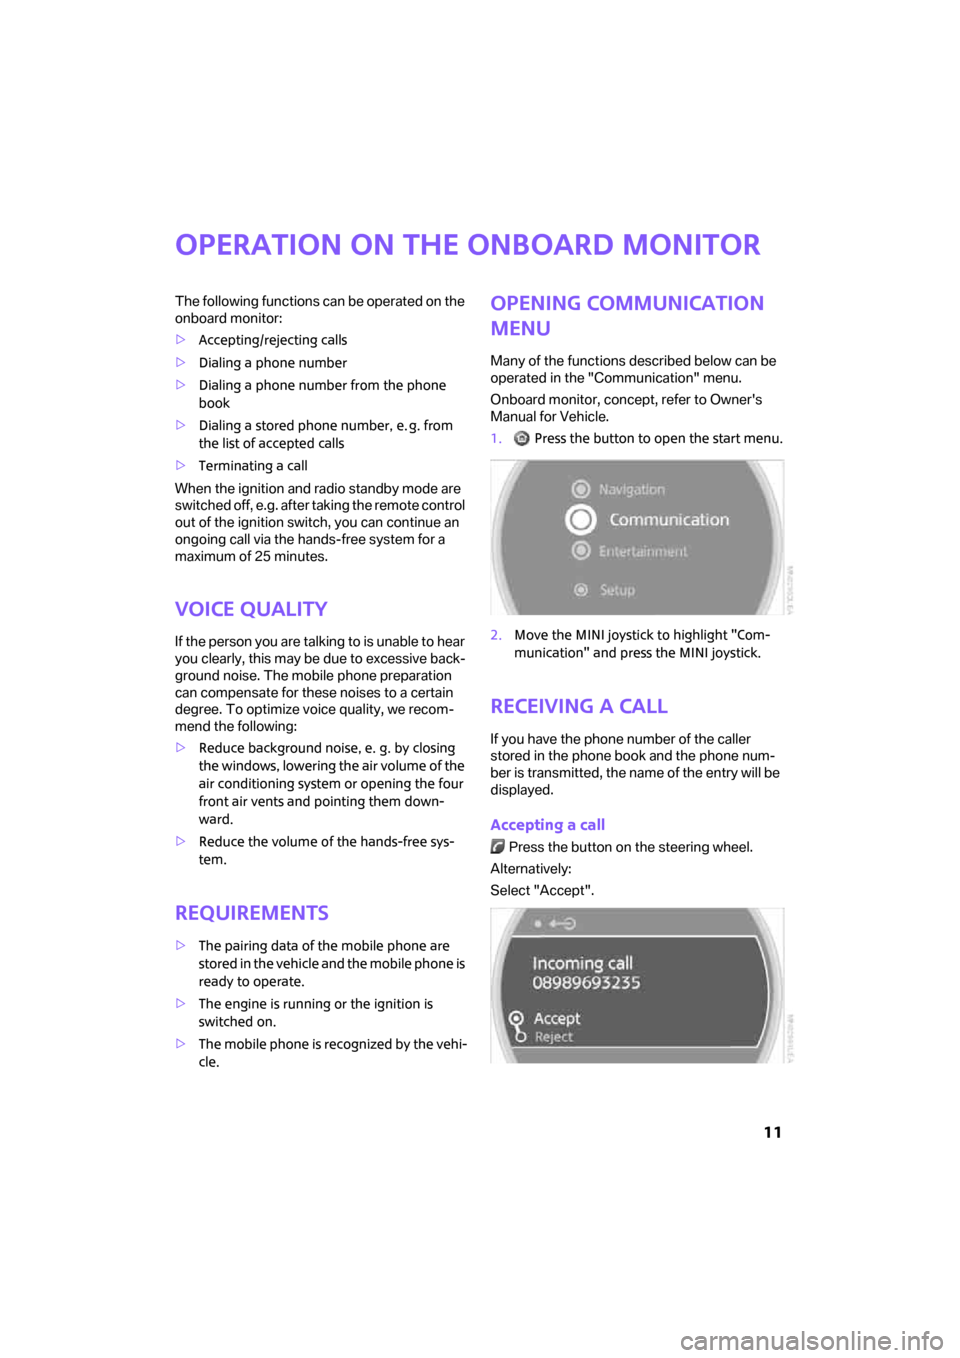 MINI Clubman 2008   (Mini Connected) User Guide  11
Operation on the onboard monitor
The following functions can be operated on the 
onboard monitor:
>Accepting/rejecting calls
>Dialing a phone number
>Dialing a phone number from the phone 
book
>D